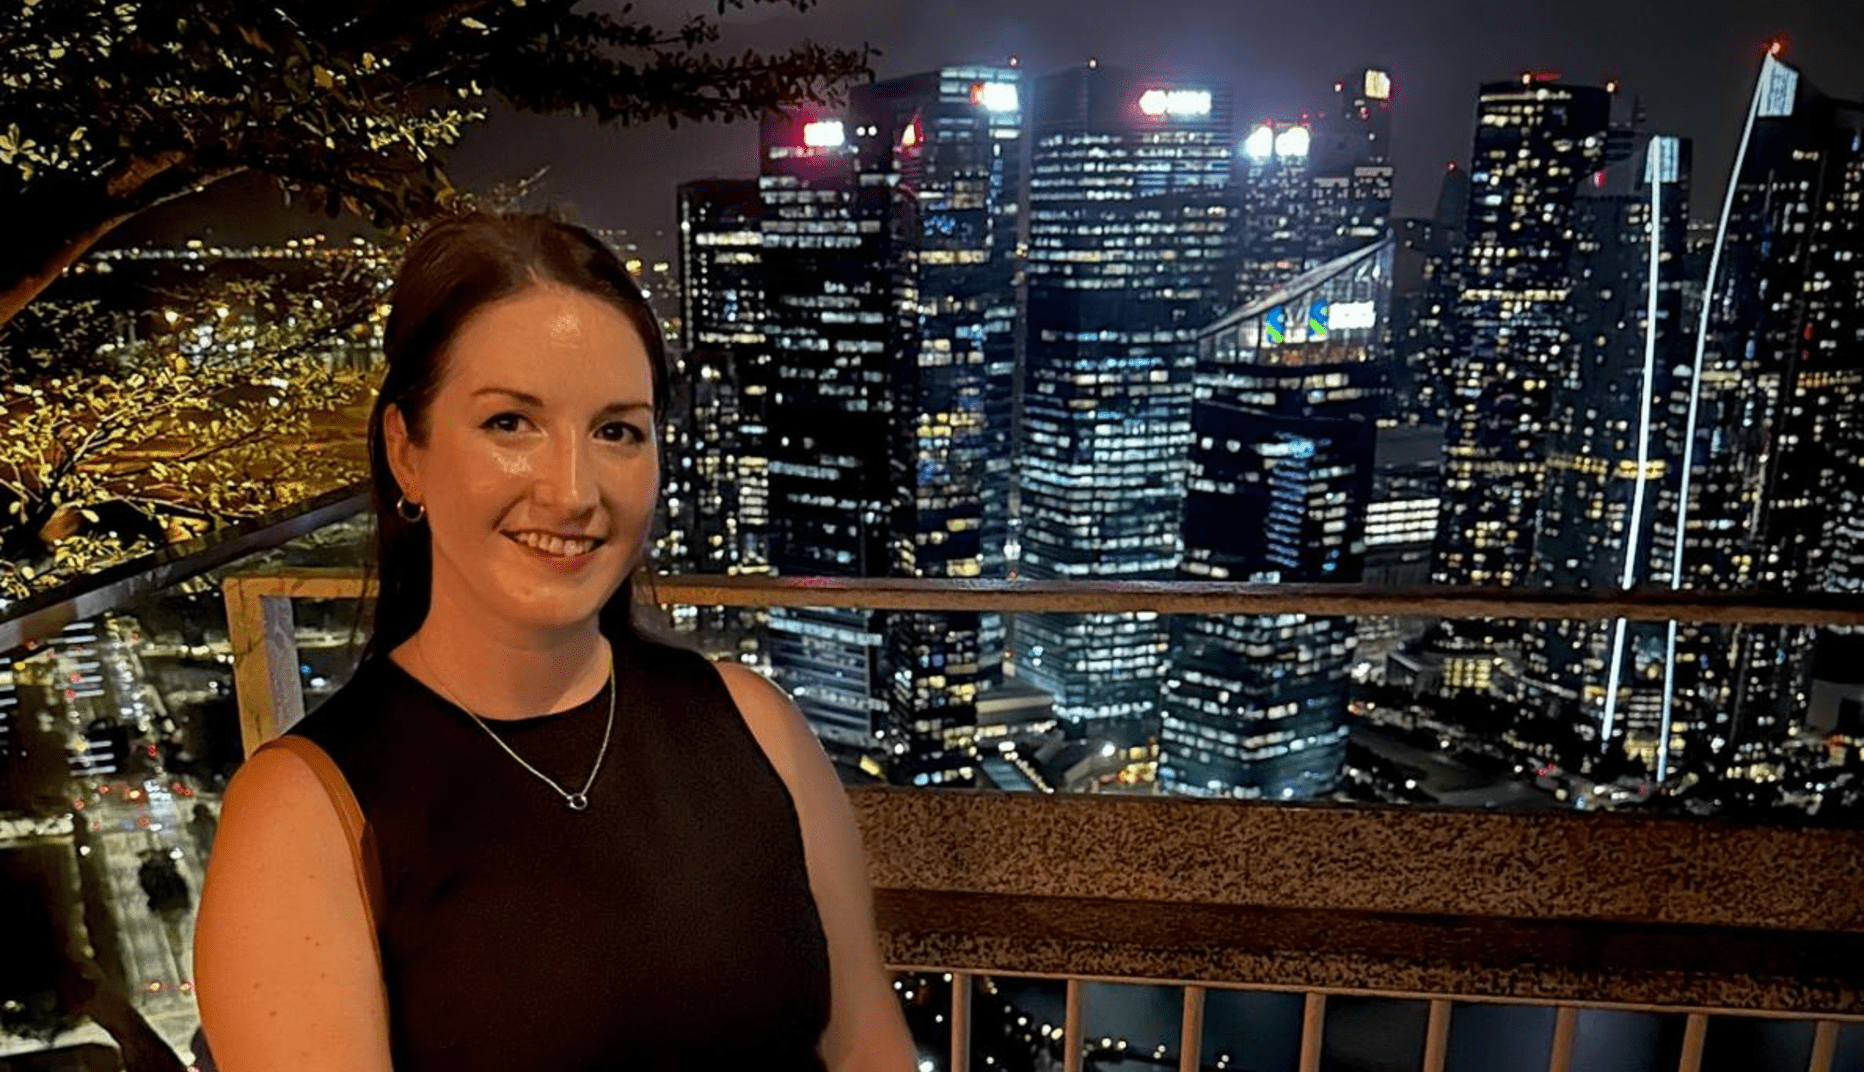 Jessica in front of Singapore at night